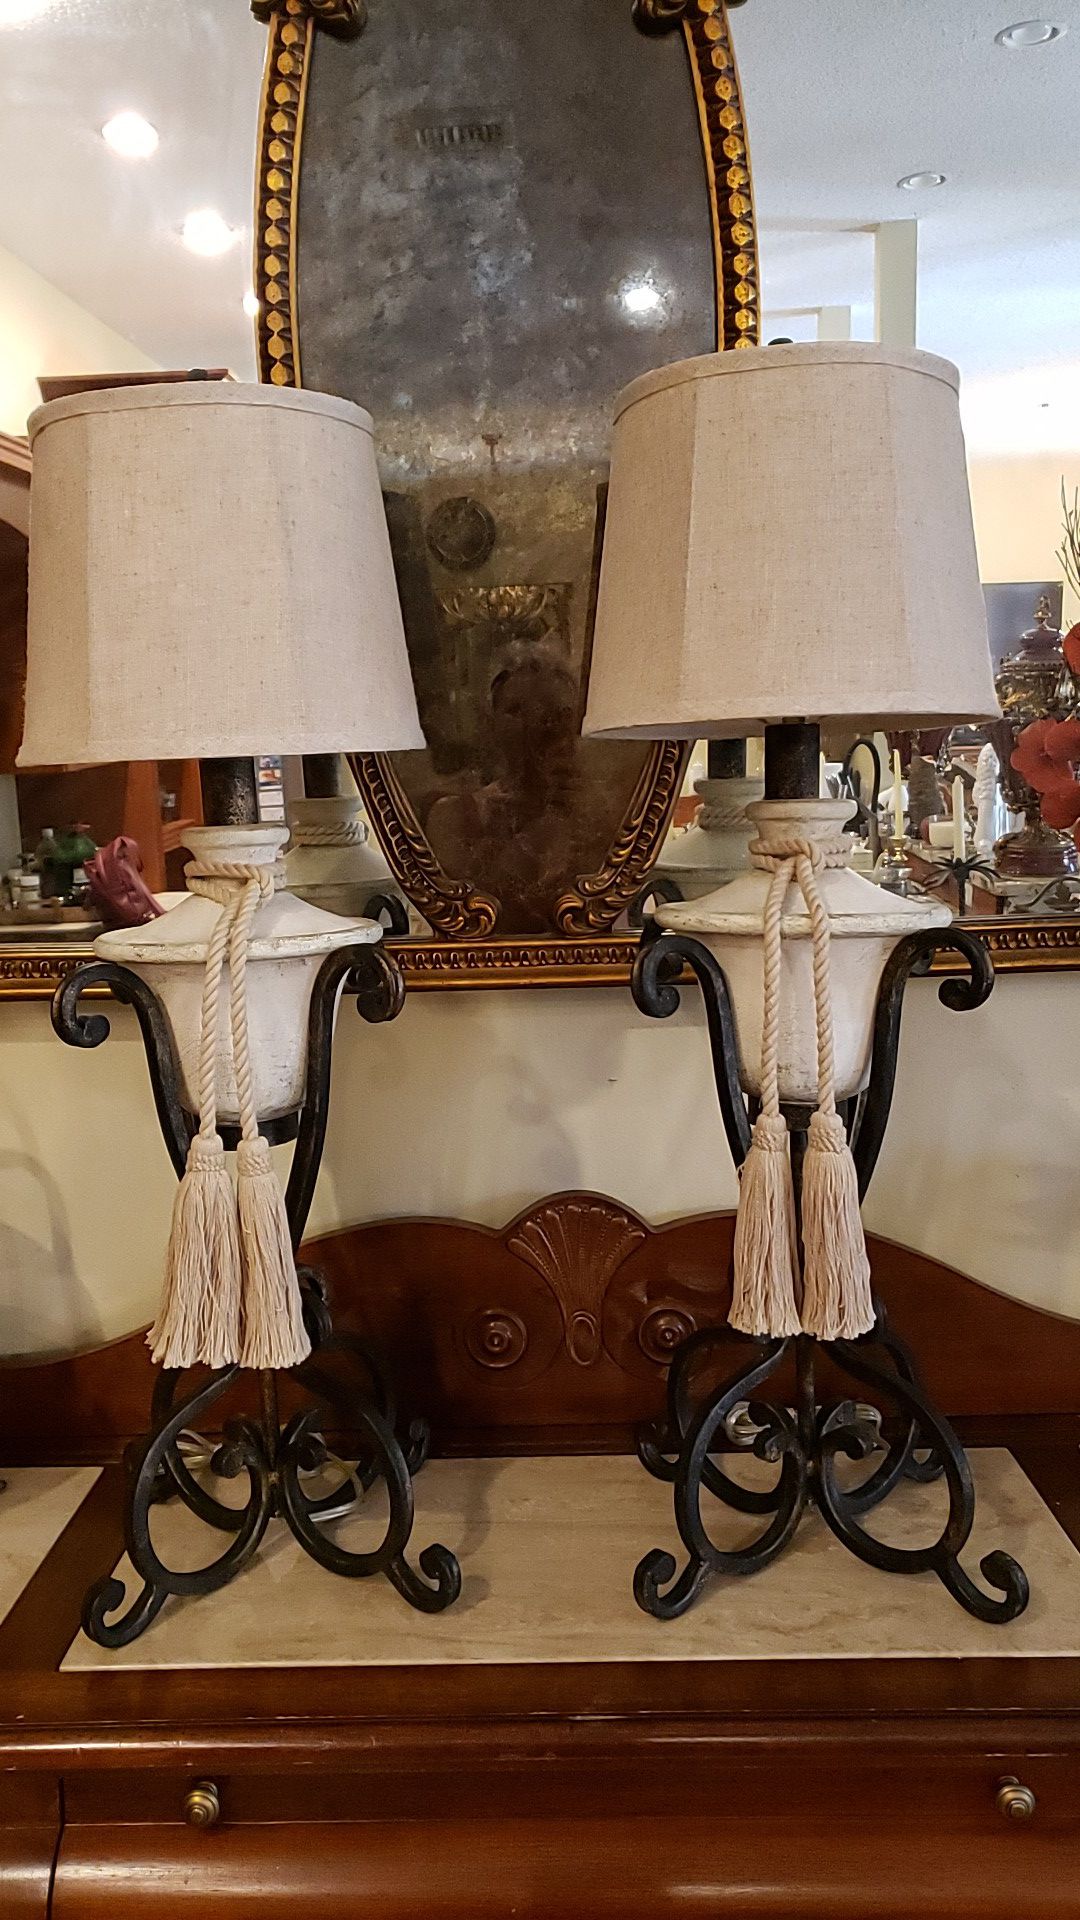 Beautiful French provincial lamps